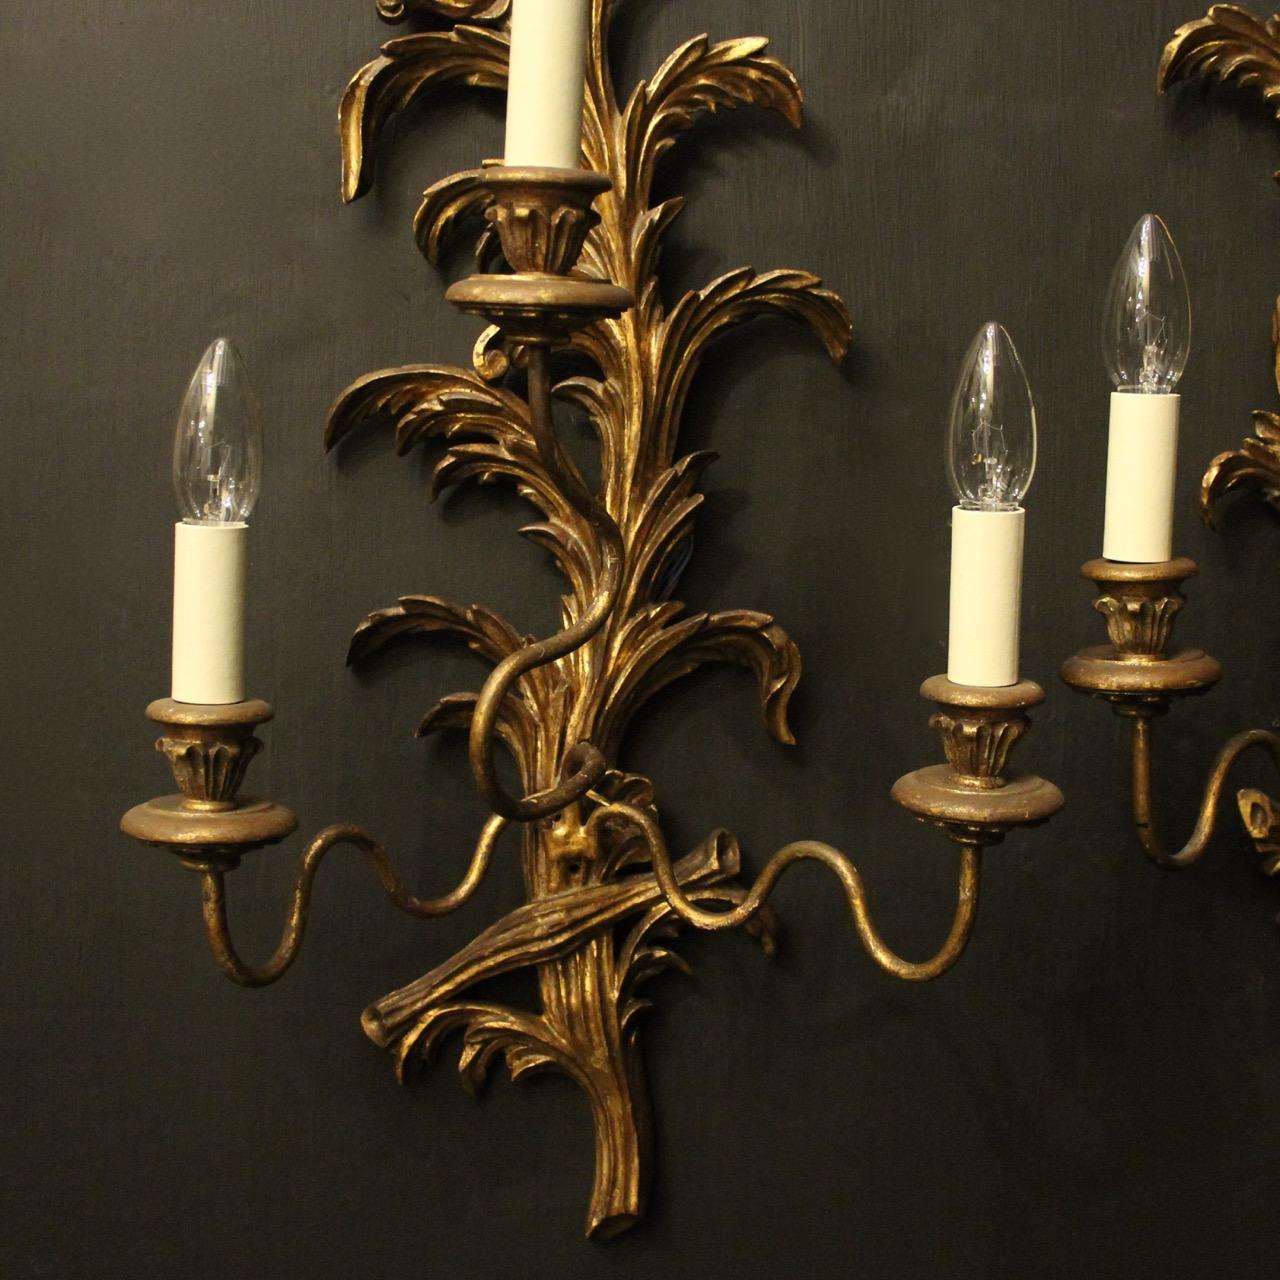 A decorative Italian Florentine gilded carved wood triple arm wall lights, the metal leaf scrolling arms with carved wooden bobeches and leaf candle sconces, issuing from a ornately carved elongated opposing wooden leaf clad backplate, lovely